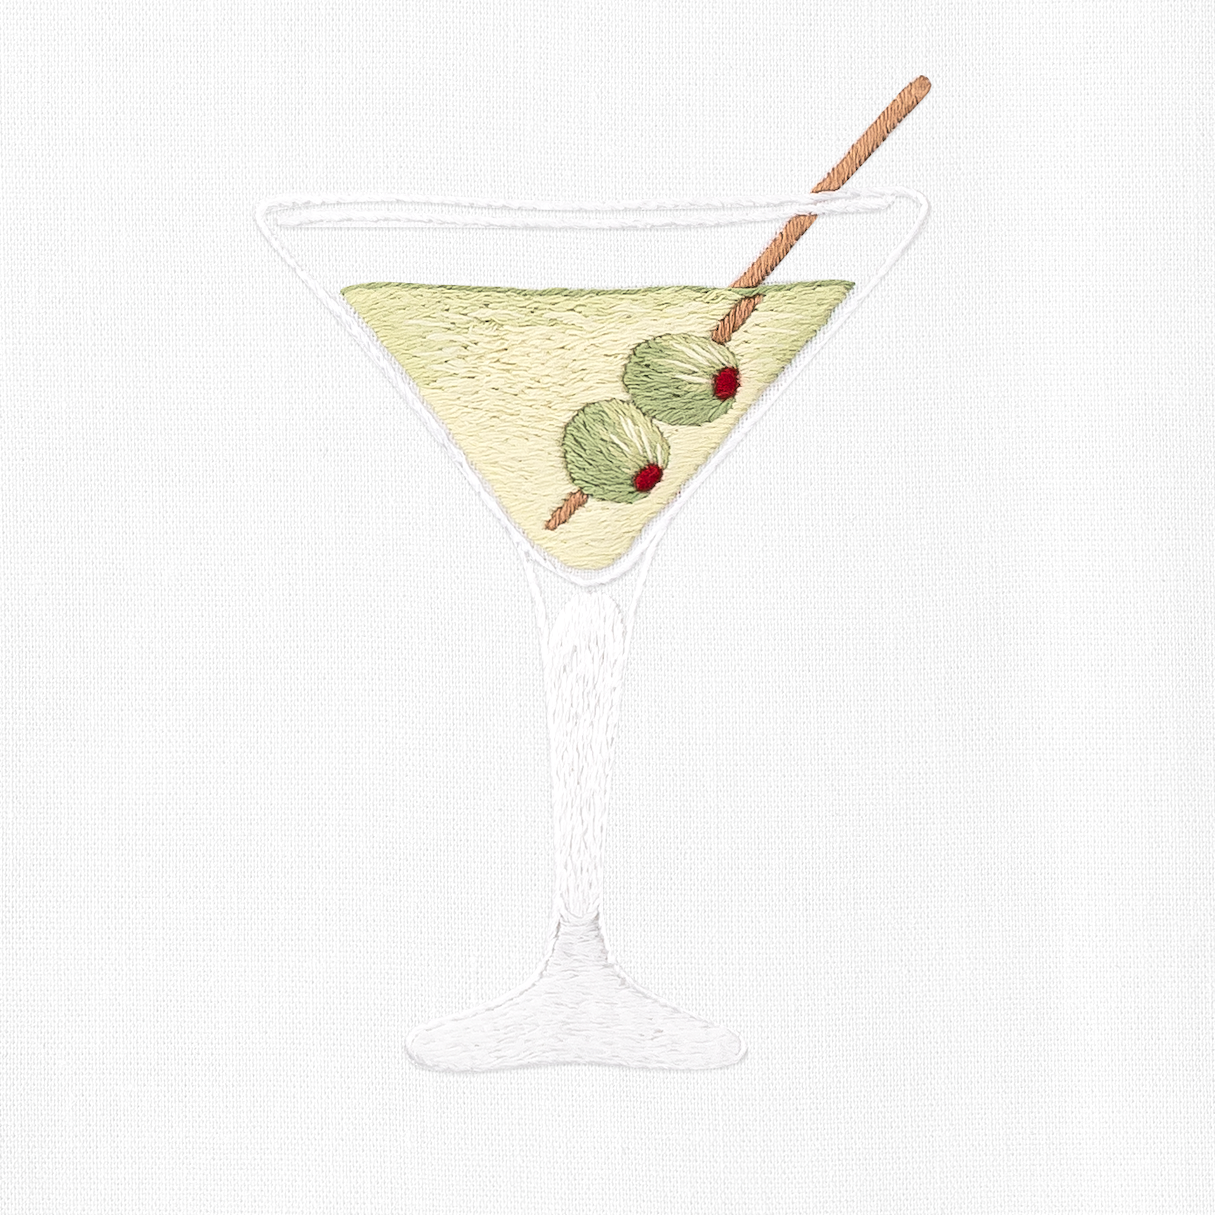 A close up detailed image of the embroidery - A dirty martini with two olives.